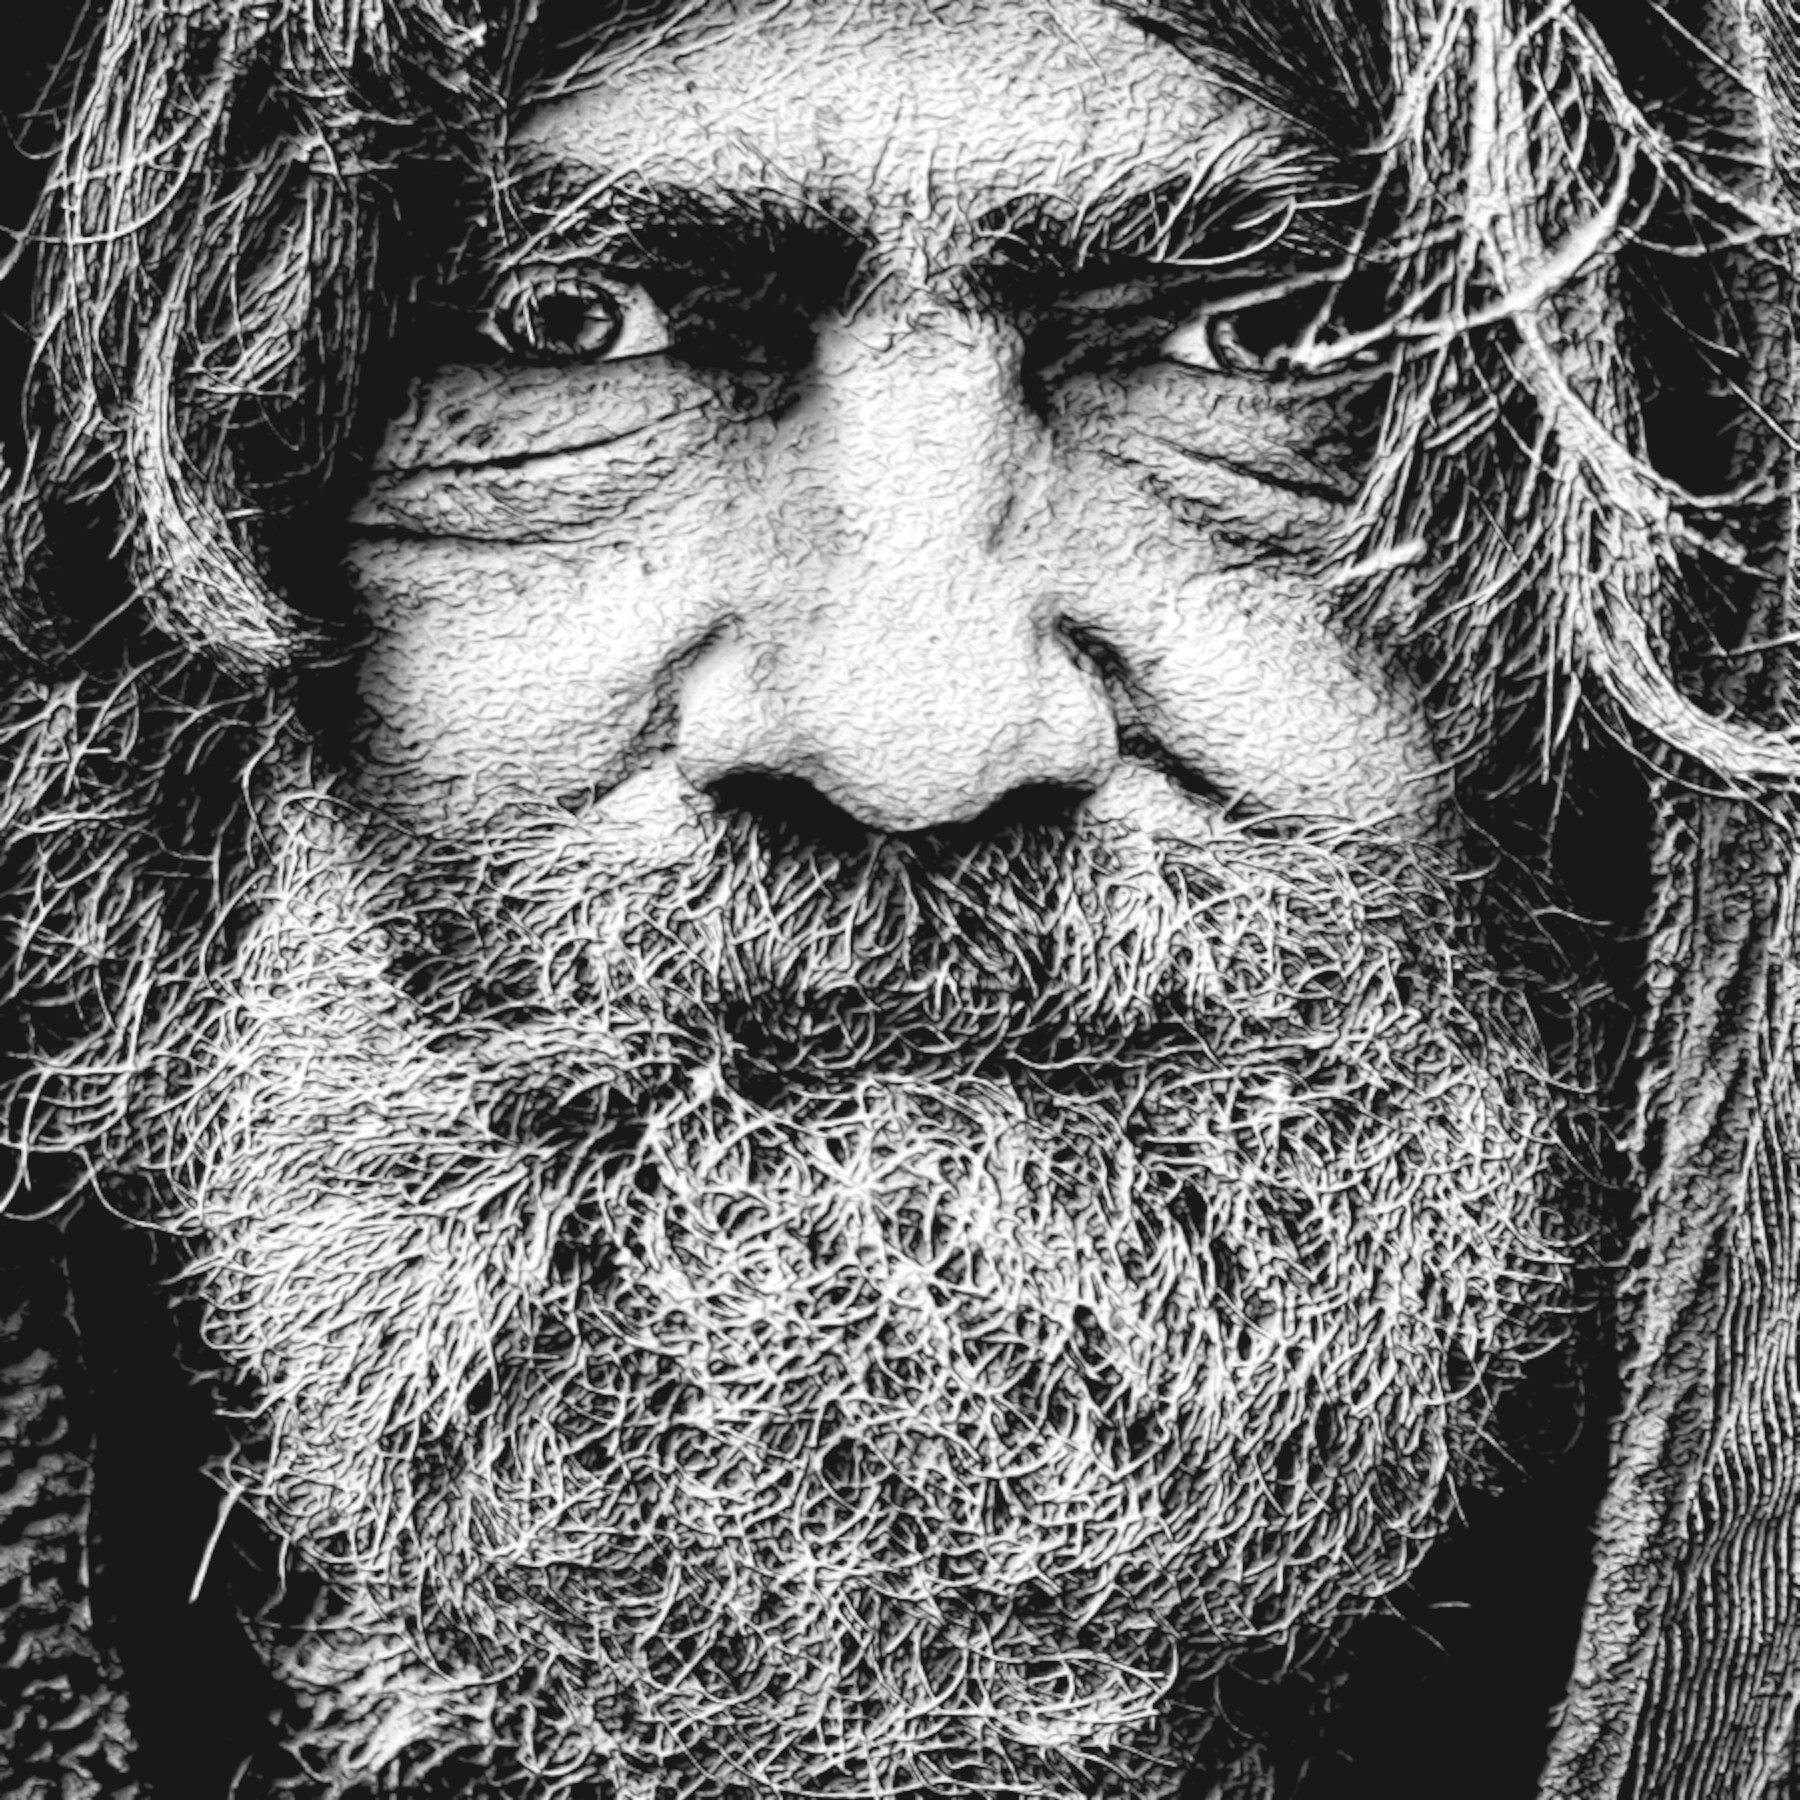 2021-04-29 07-15-23 people-homeless-man-male_1k with effect B (MeanCurvature+Neon), option B&W (C2G) (normal texture) and edges=medium.jpeg